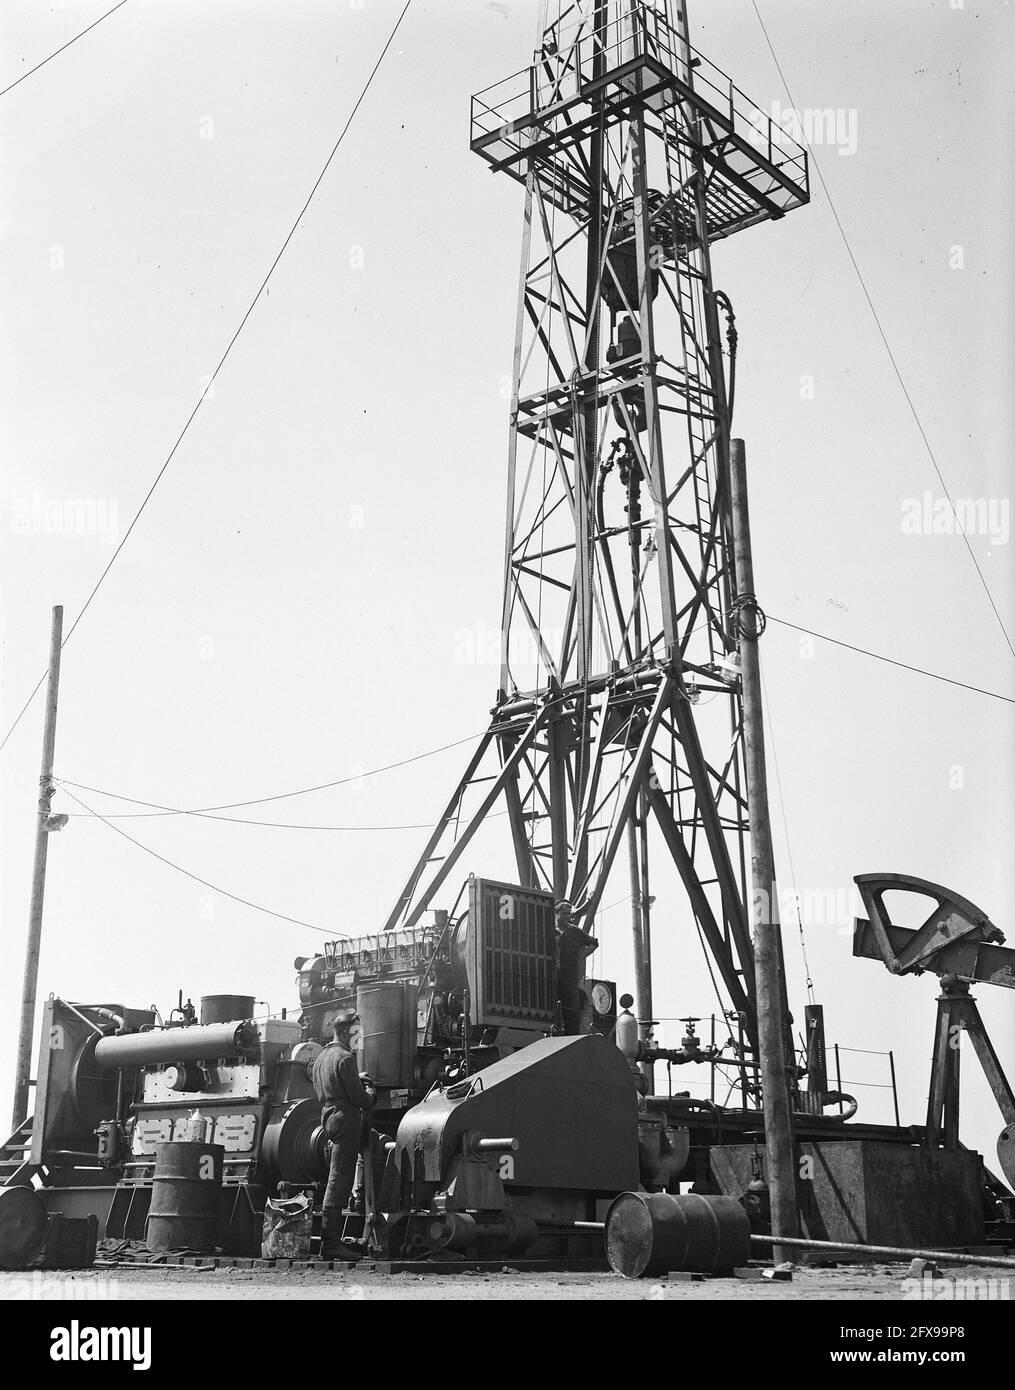 Petroleum extraction Black and White Stock Photos & Images - Alamy